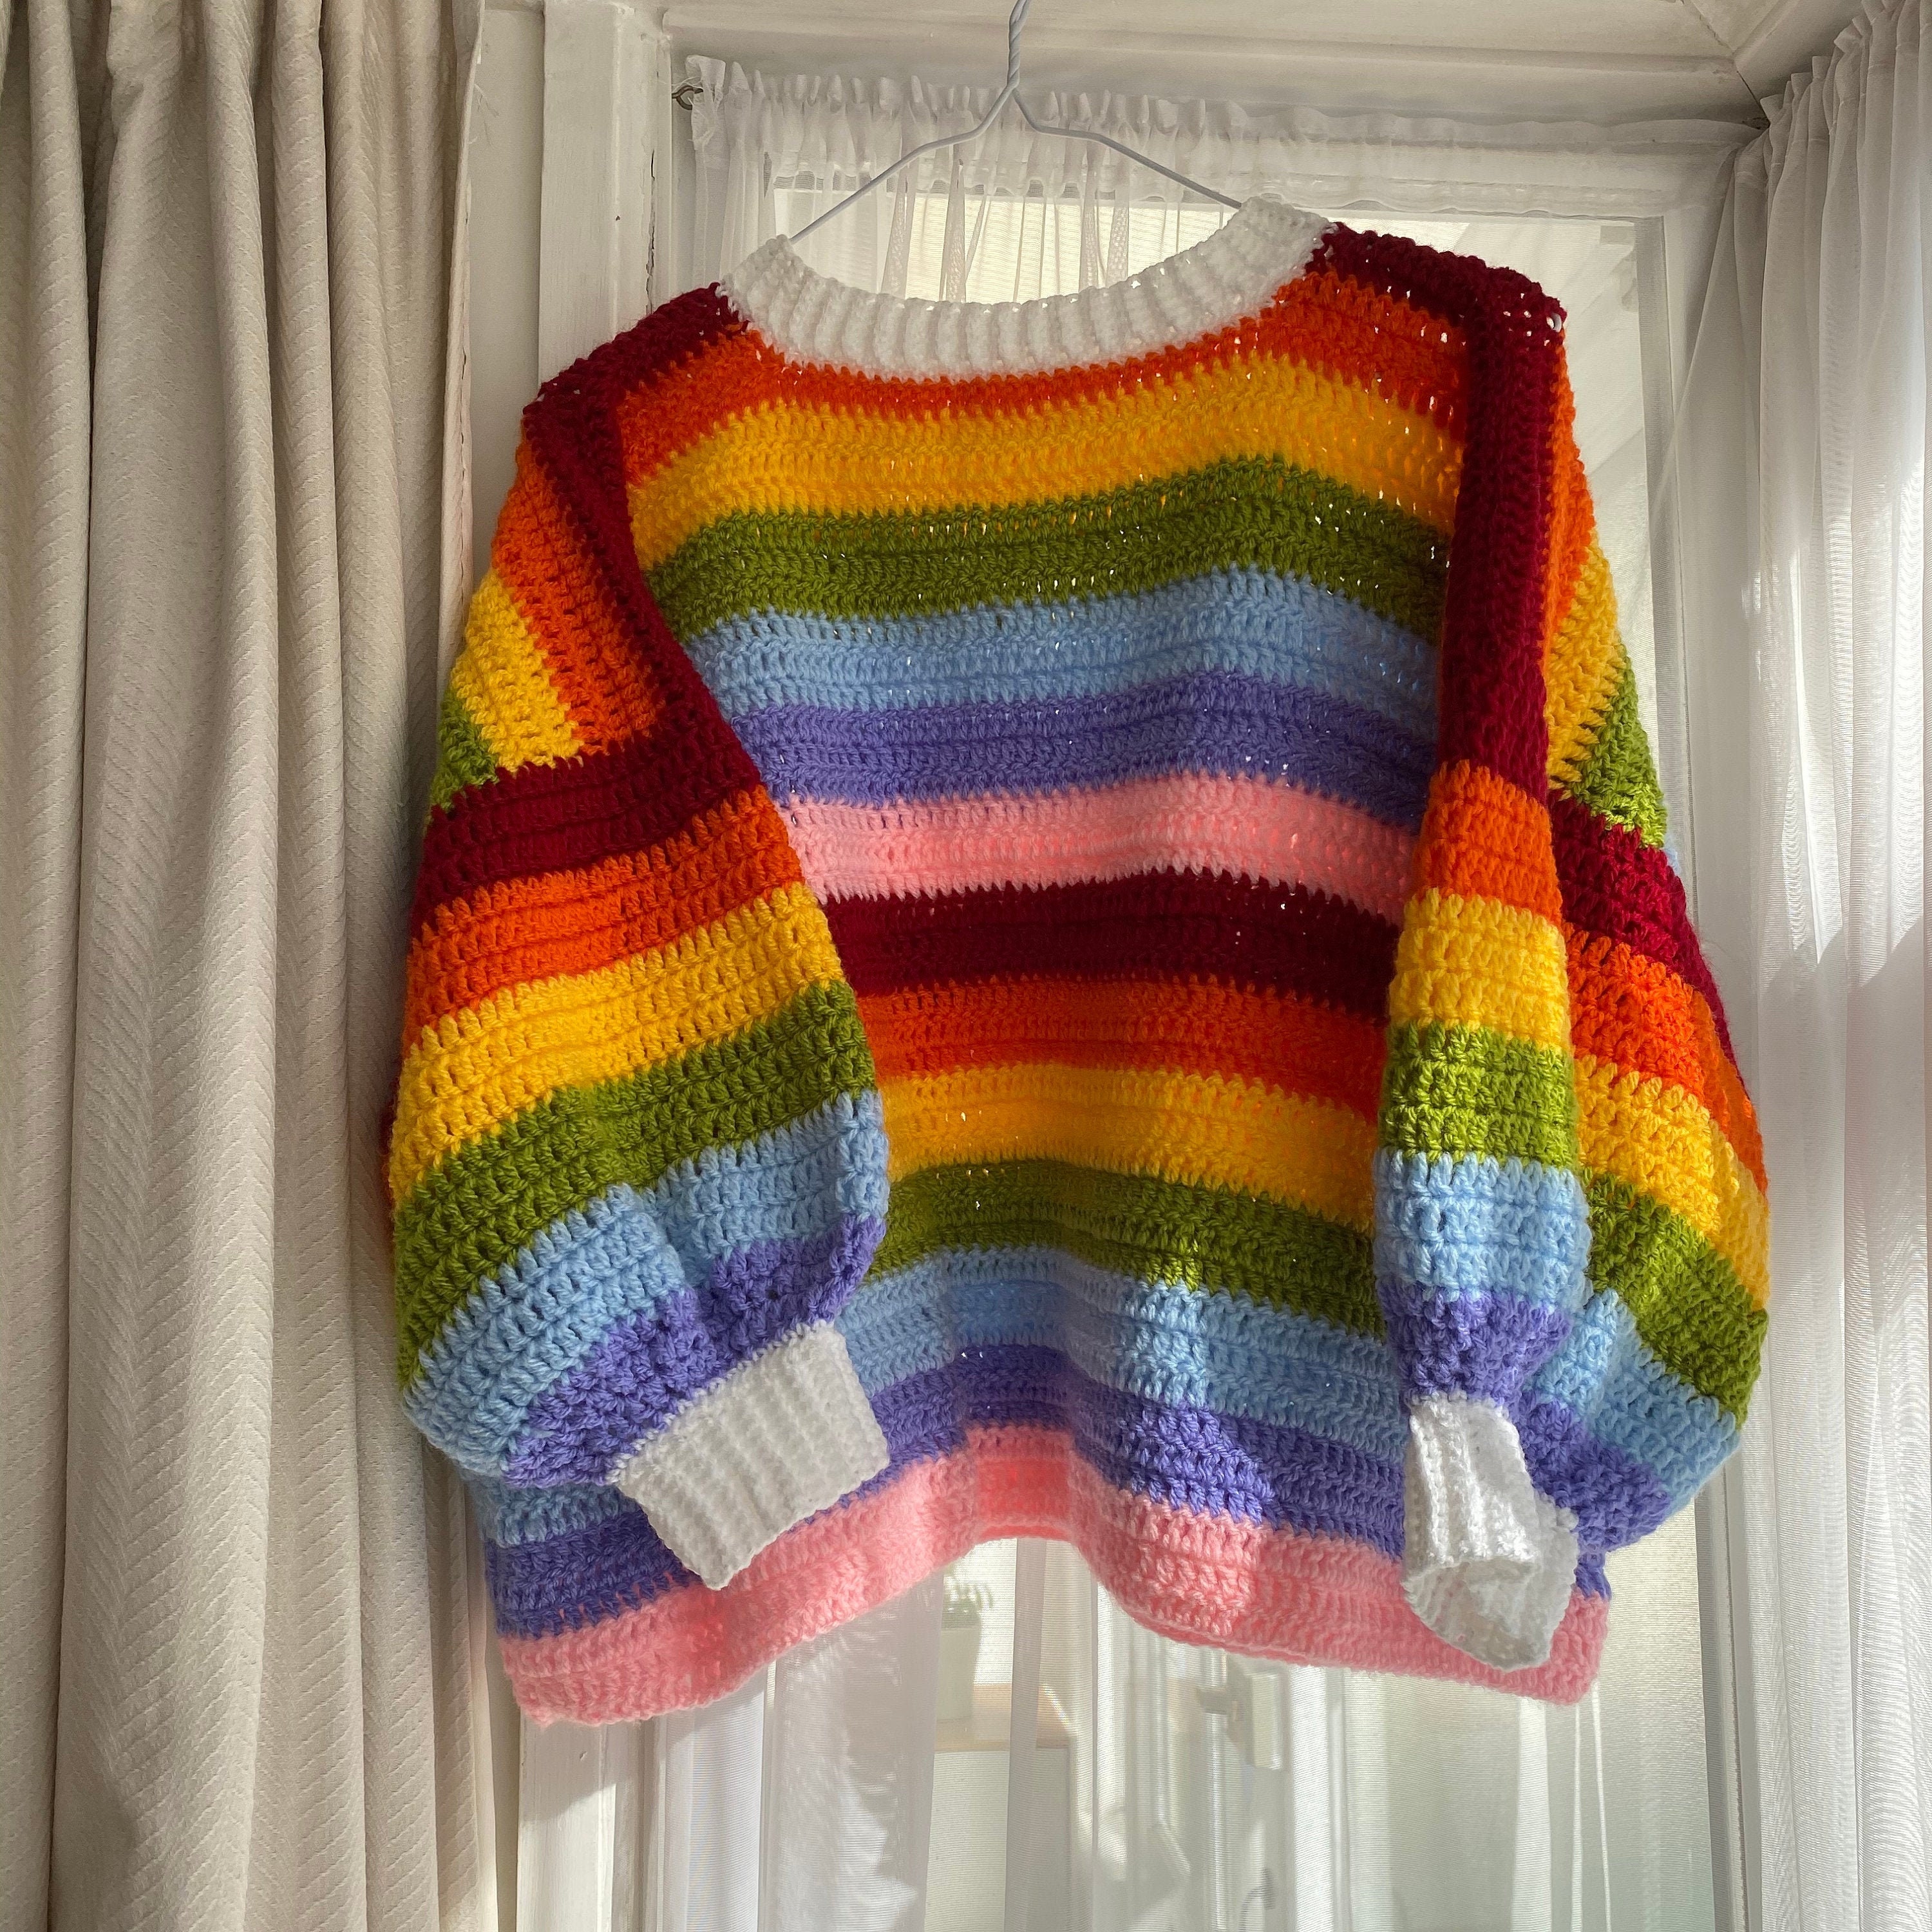 hot sale 4400 pcs rainbow hand-knitted